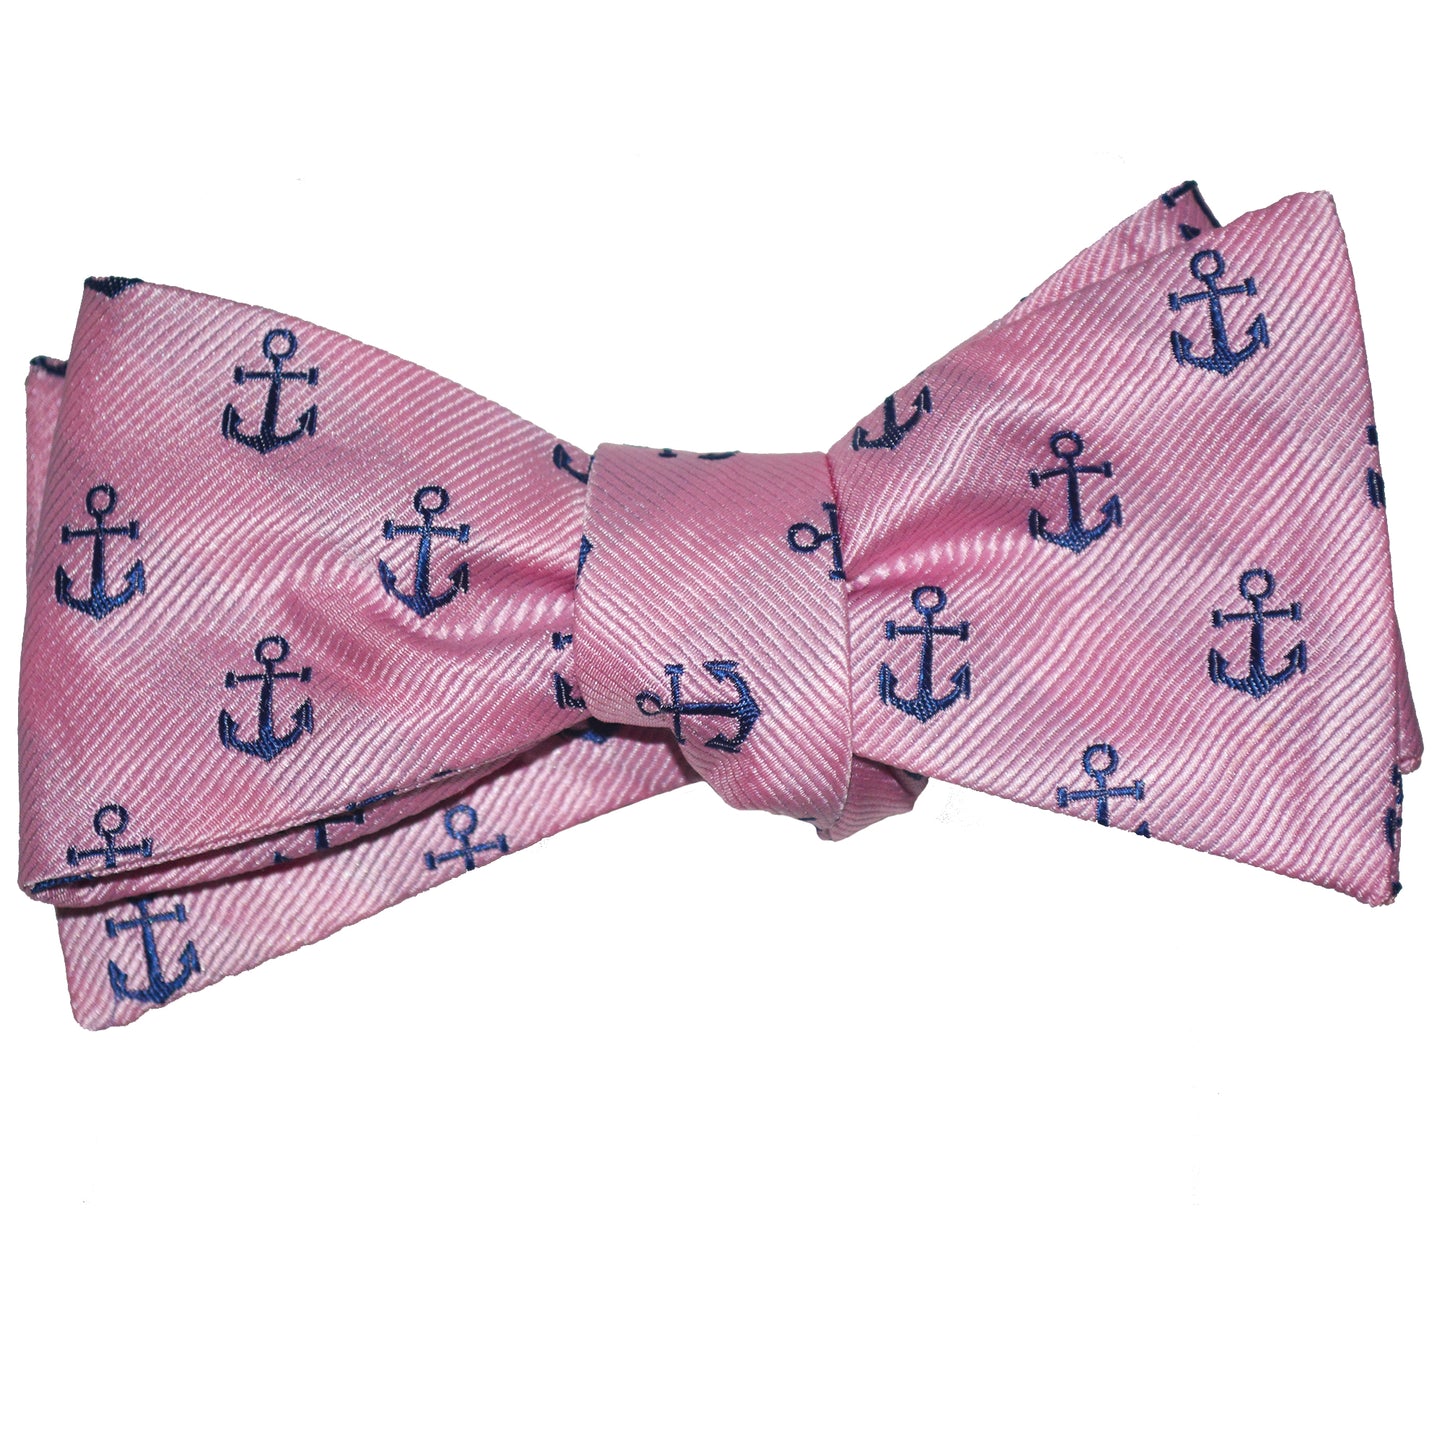 Anchor Bow Tie - Navy on Pink, Woven Silk - SummerTies